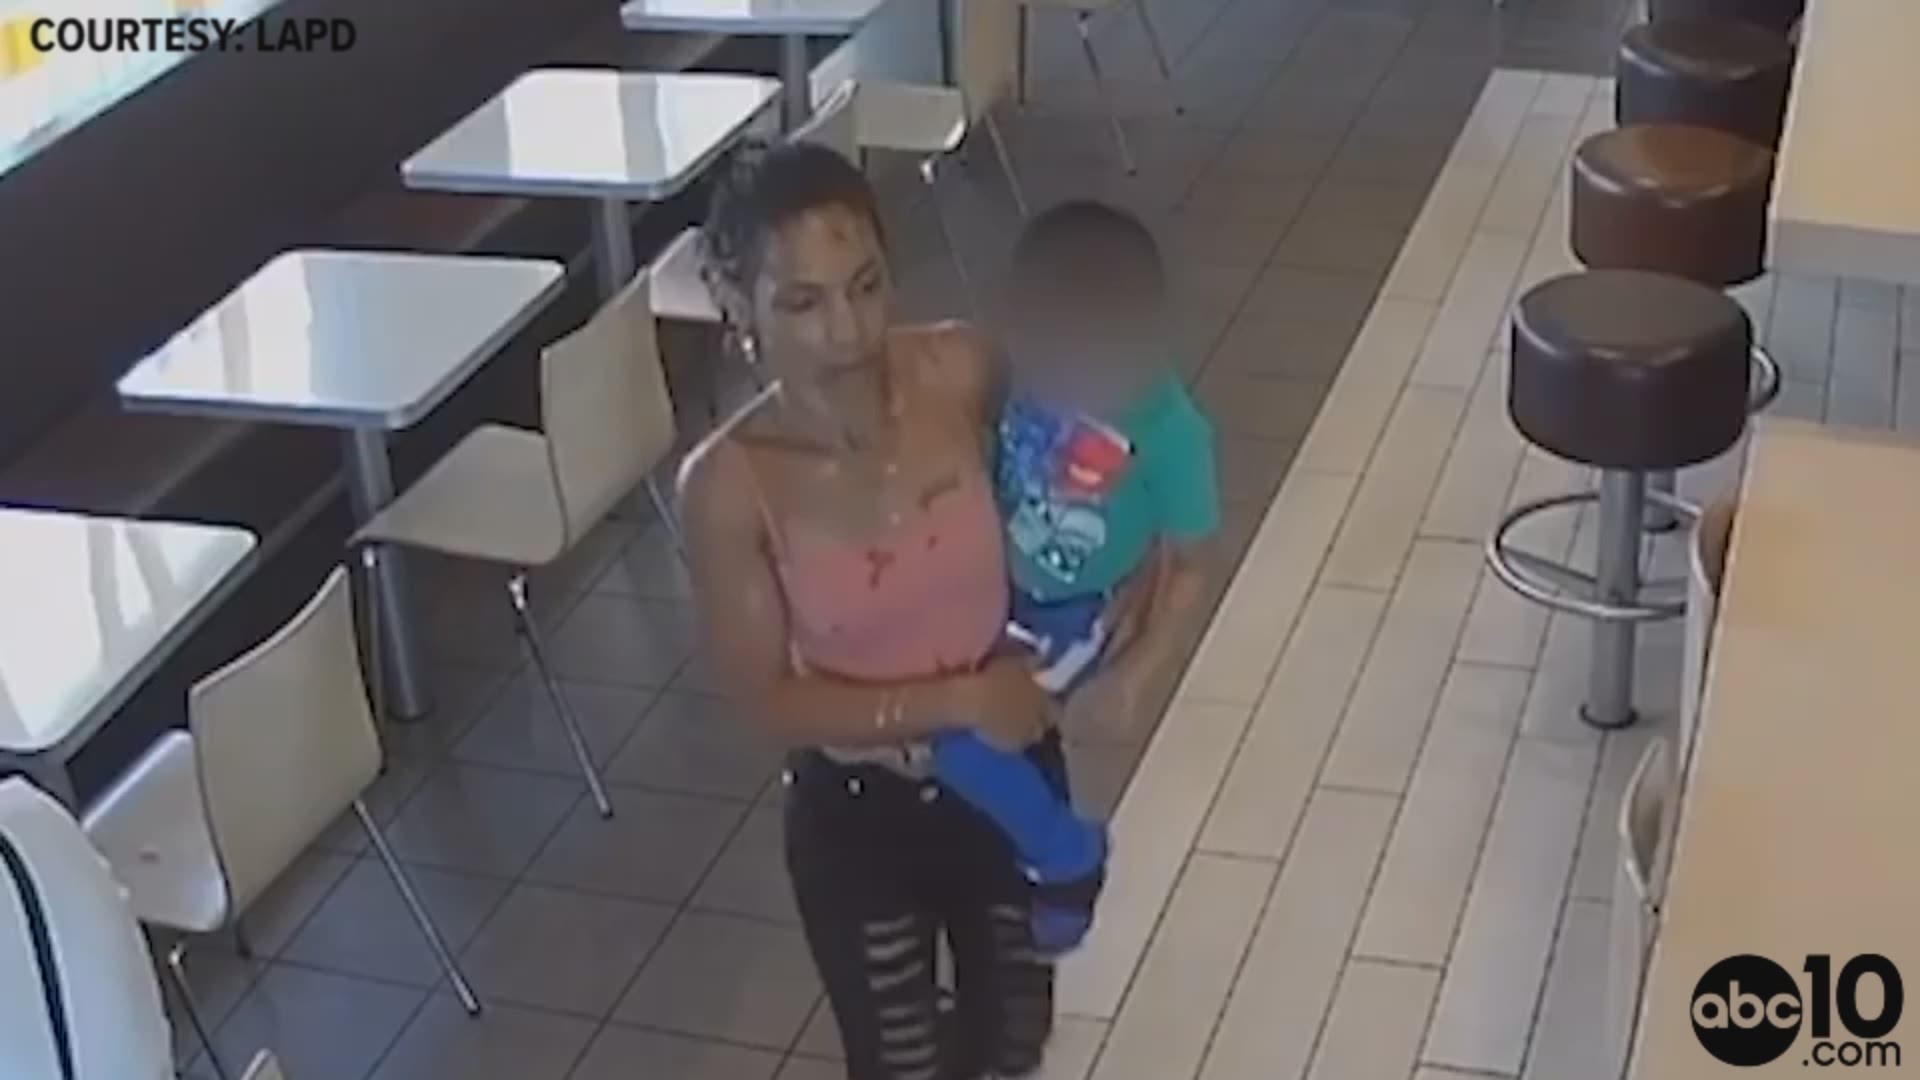 Surveillance cameras show the woman pick up the boy and carry him outside. She then tried to get into a parked car but a witness stopped her and she ran off.